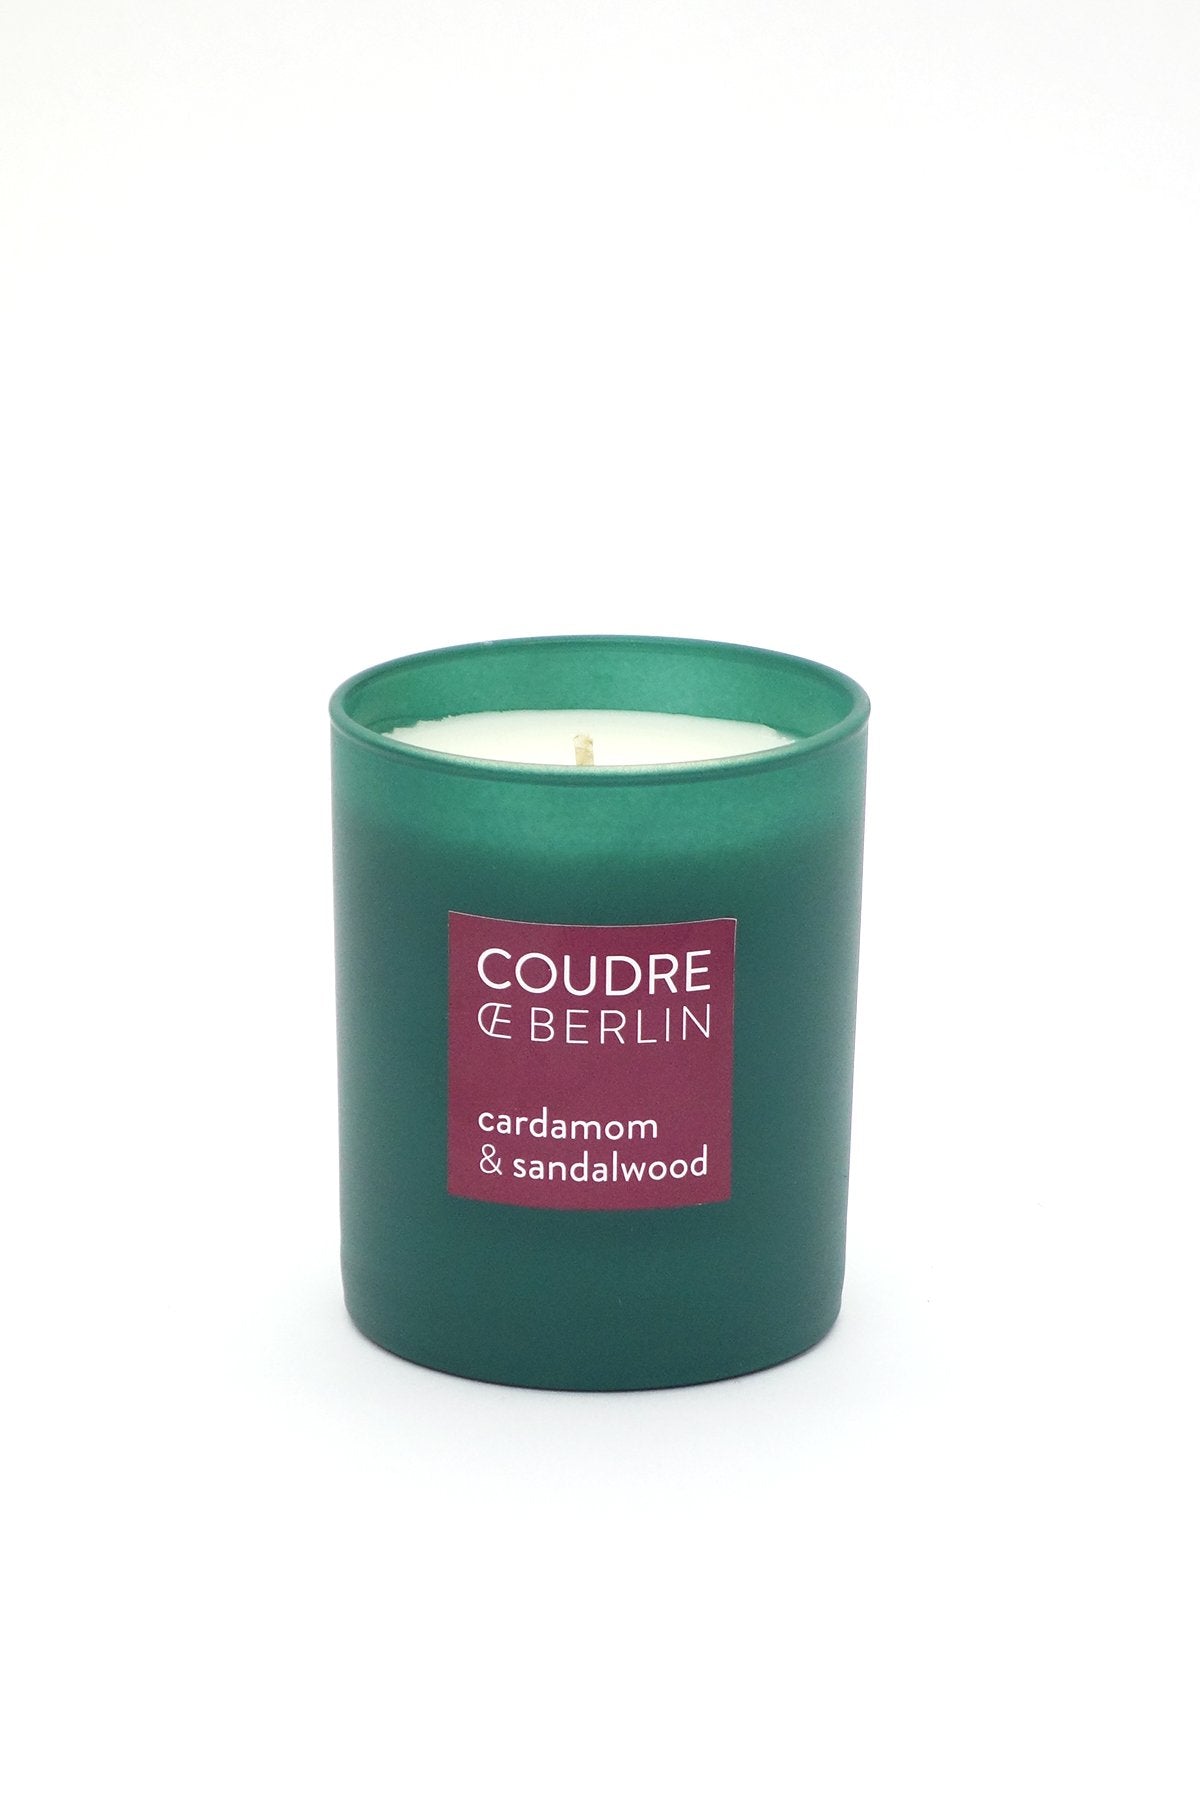  Coudre Berlin  Cardamom and Sandalwood Contemporaries Scented Candle